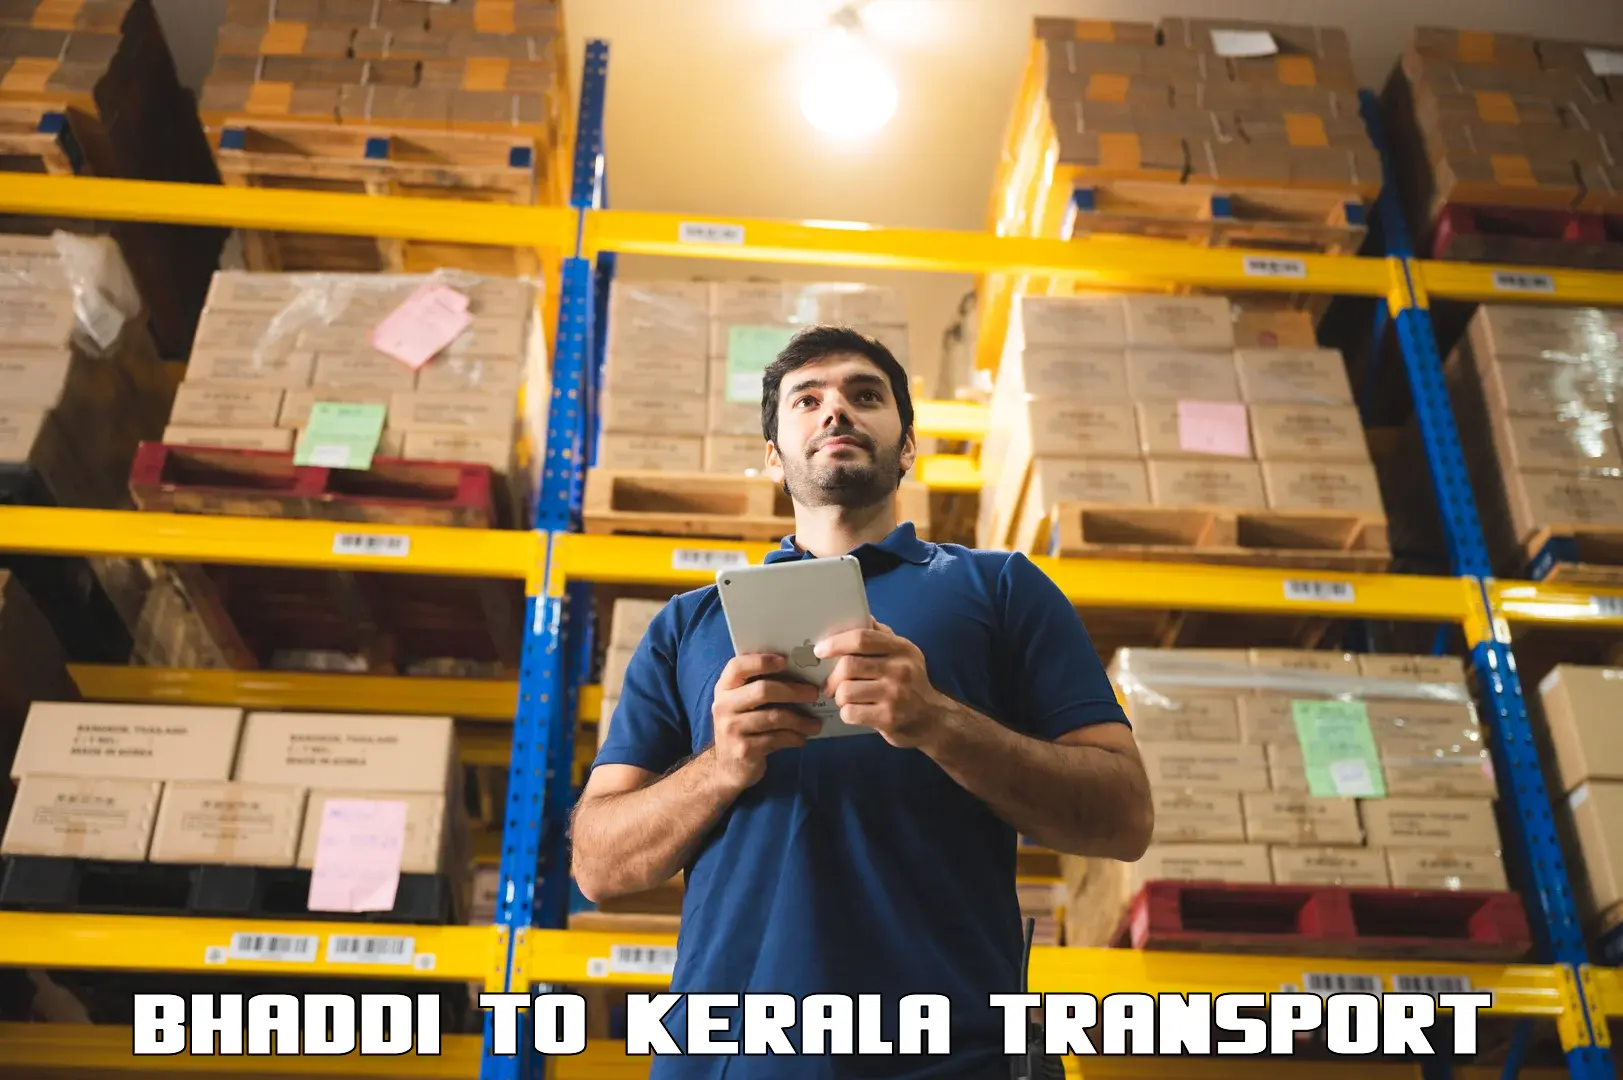 Nationwide transport services Bhaddi to Perumbavoor